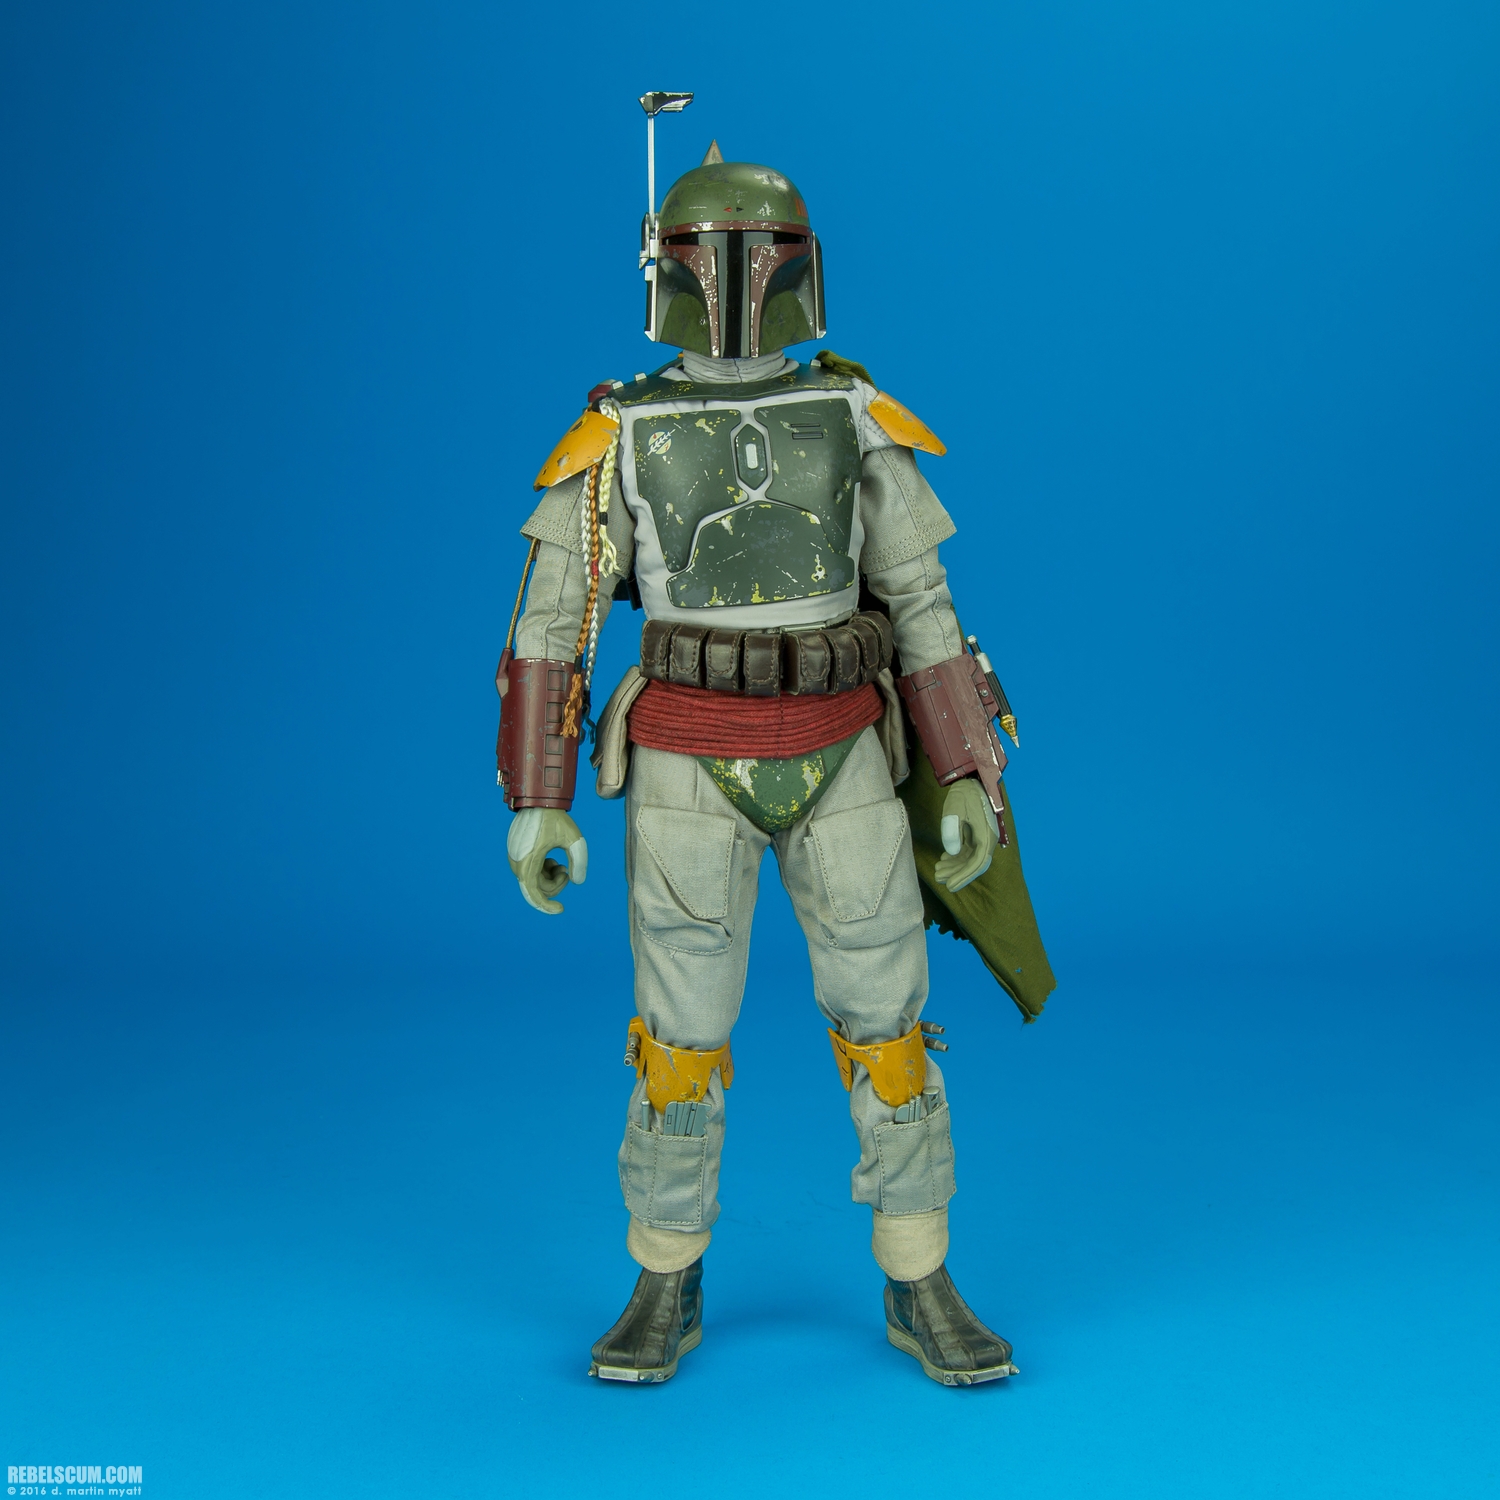 Hot-Toys-MMS313-Boba-Fett-Deluxe-Collectible-Figure-001.jpg